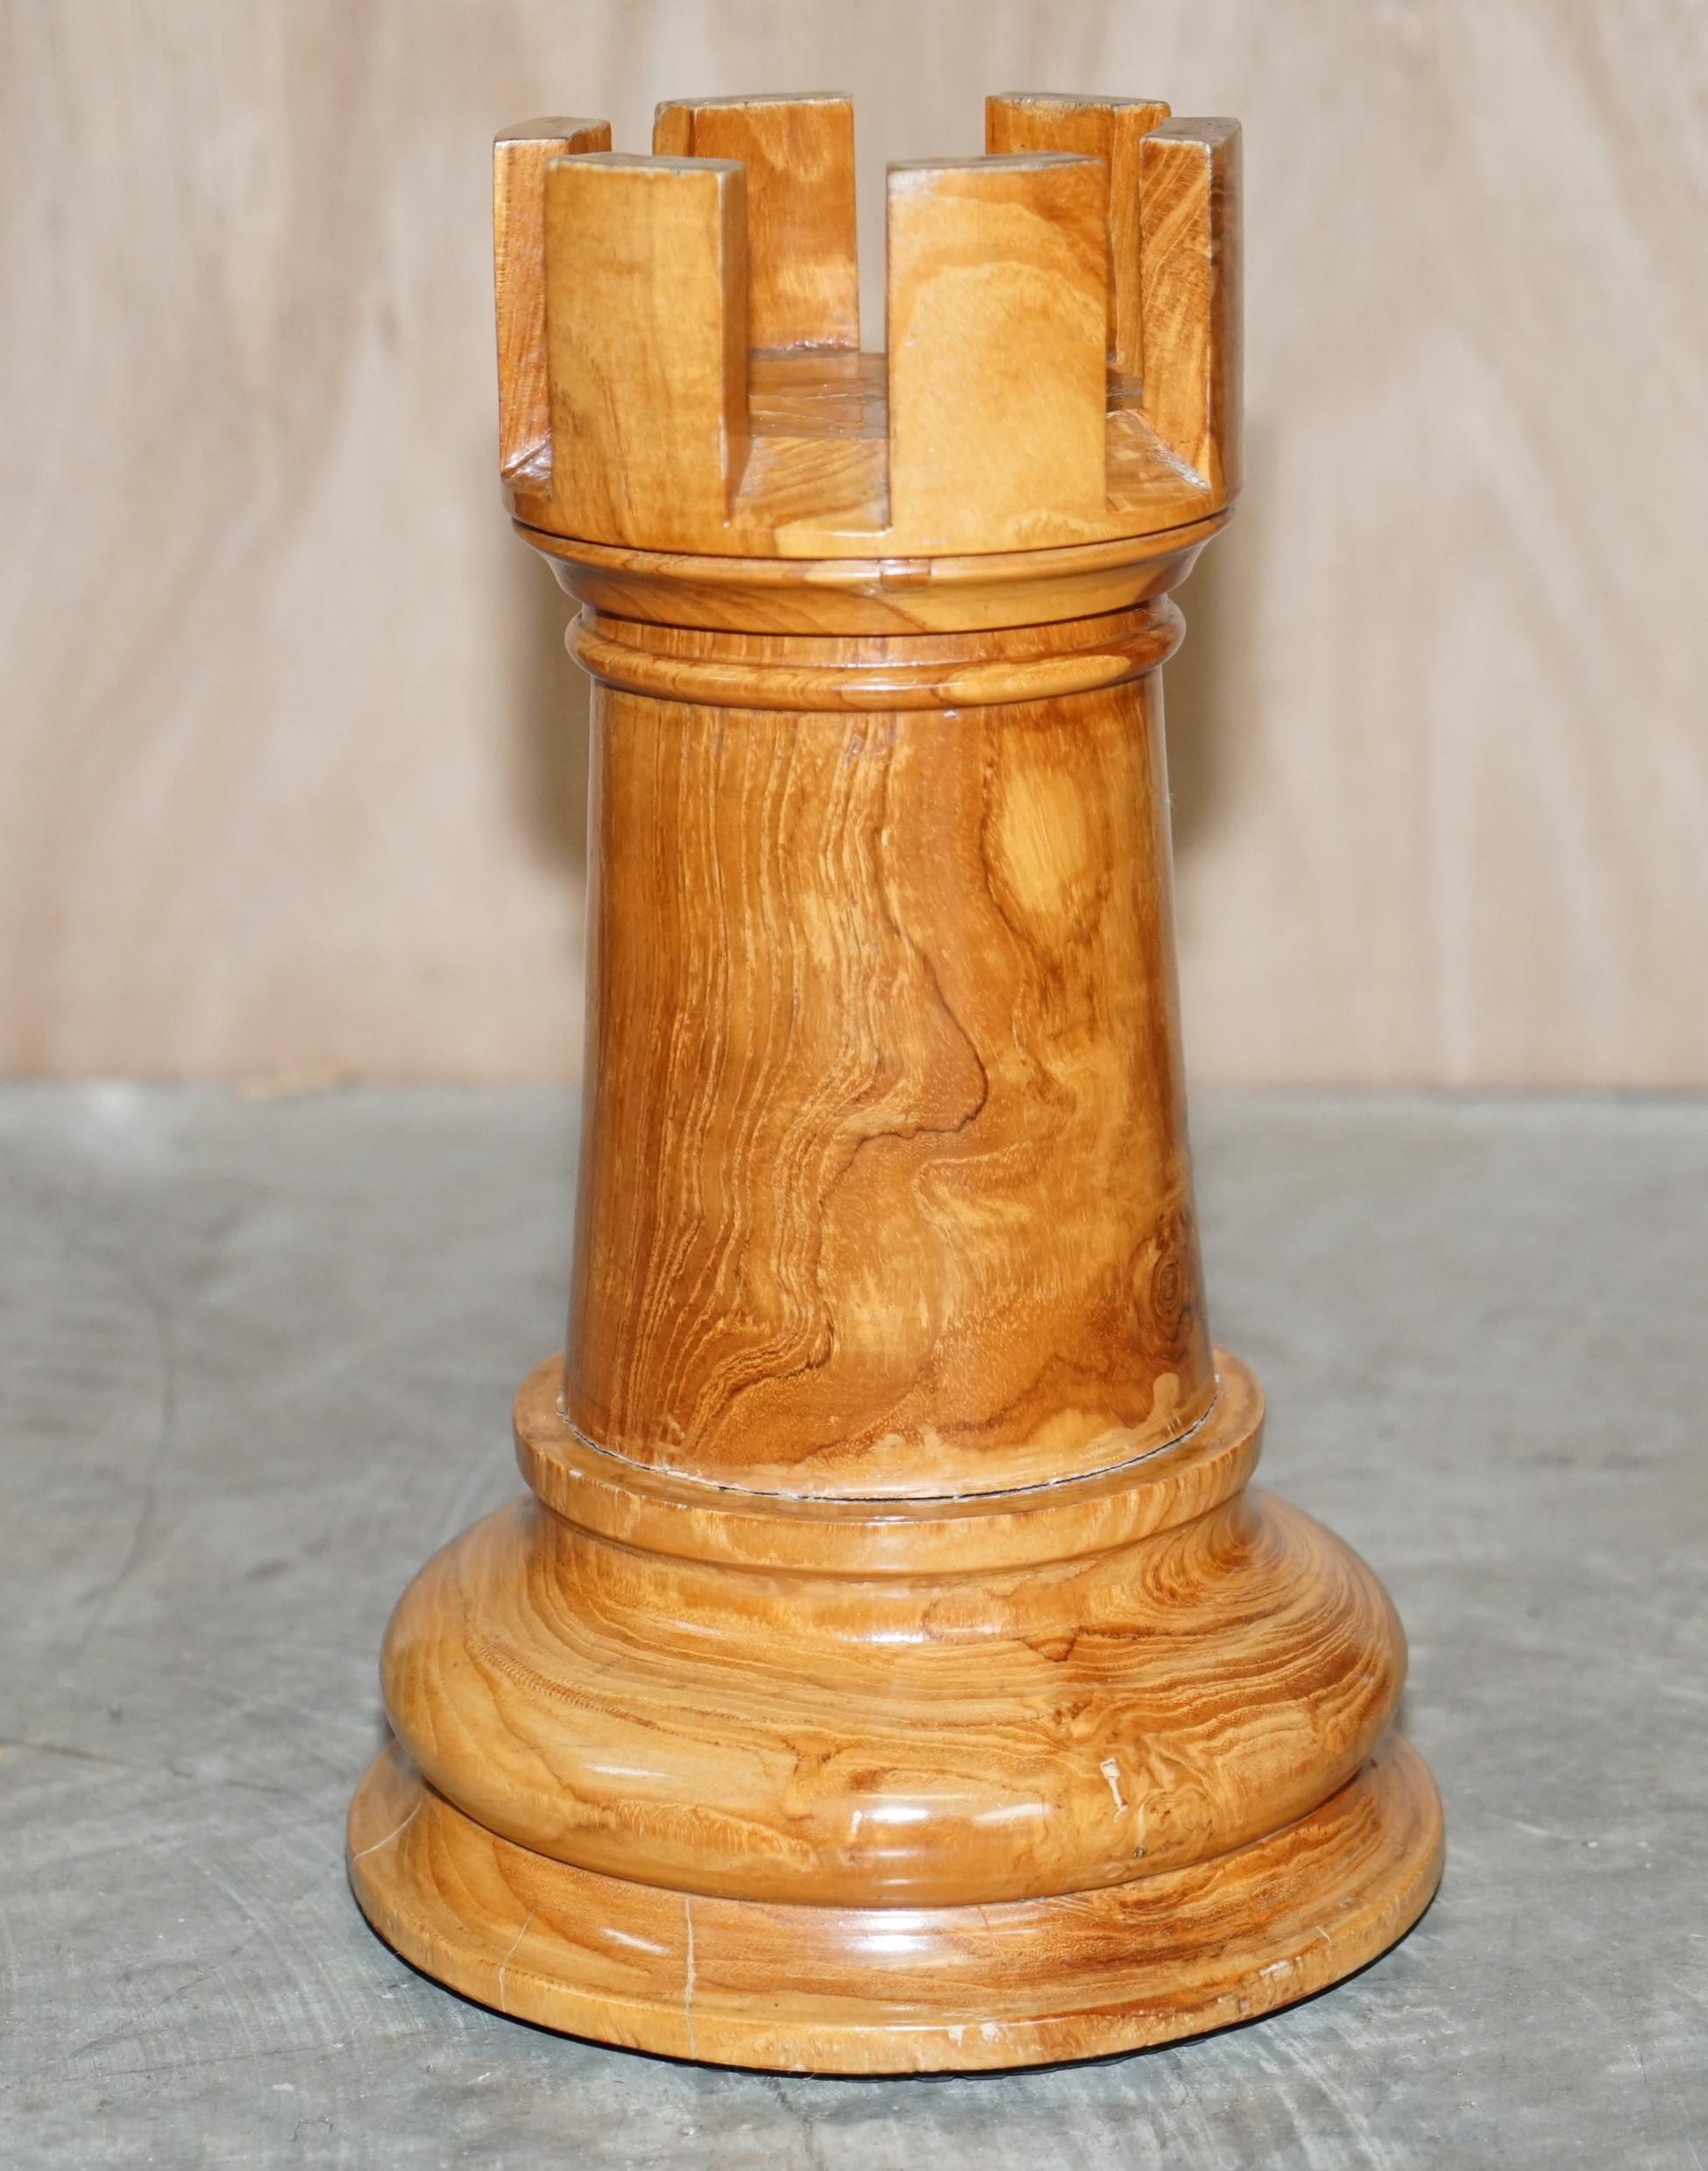 Hand-Carved Giant Hand Carved Wood Chess Set Tallest Piece Beautiful Timber Patina